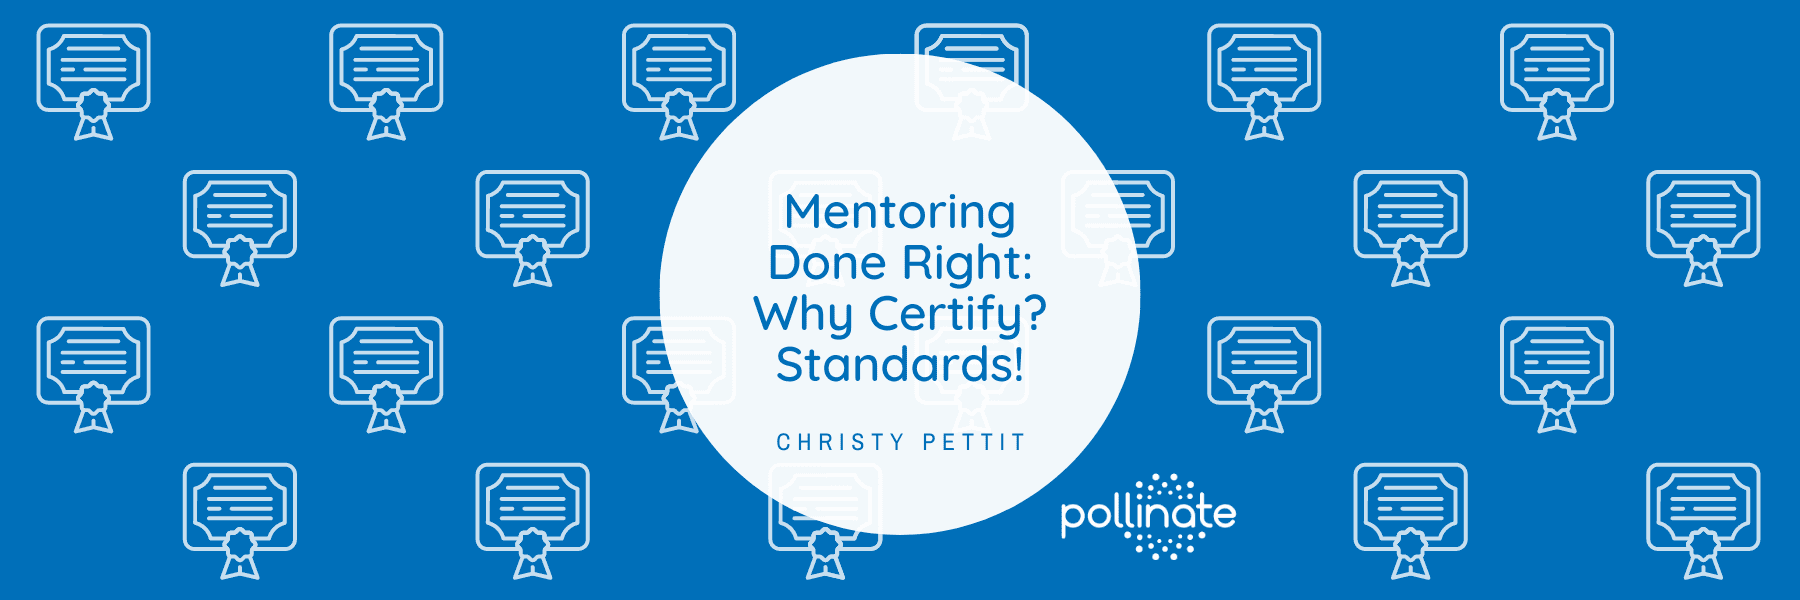 Mentoring Done Right: Why Certify? Standards! Banner.